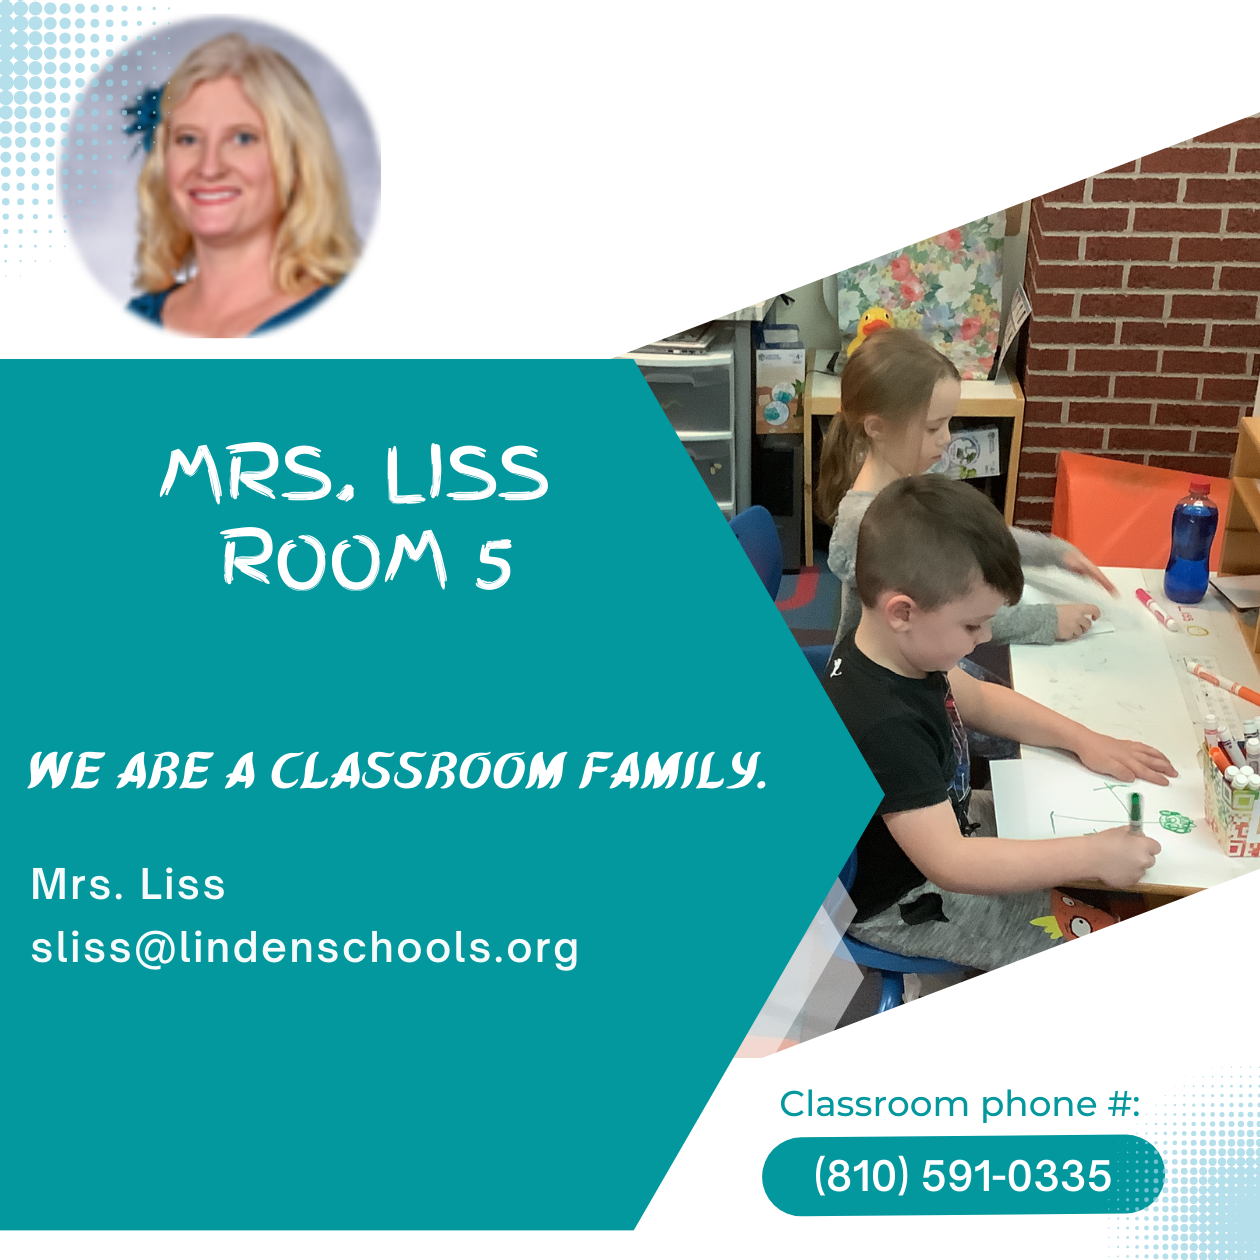 Picture of teacher and kids writing.  Also email sliss@lindenschools.org and phone number of classroom 810-591-0335